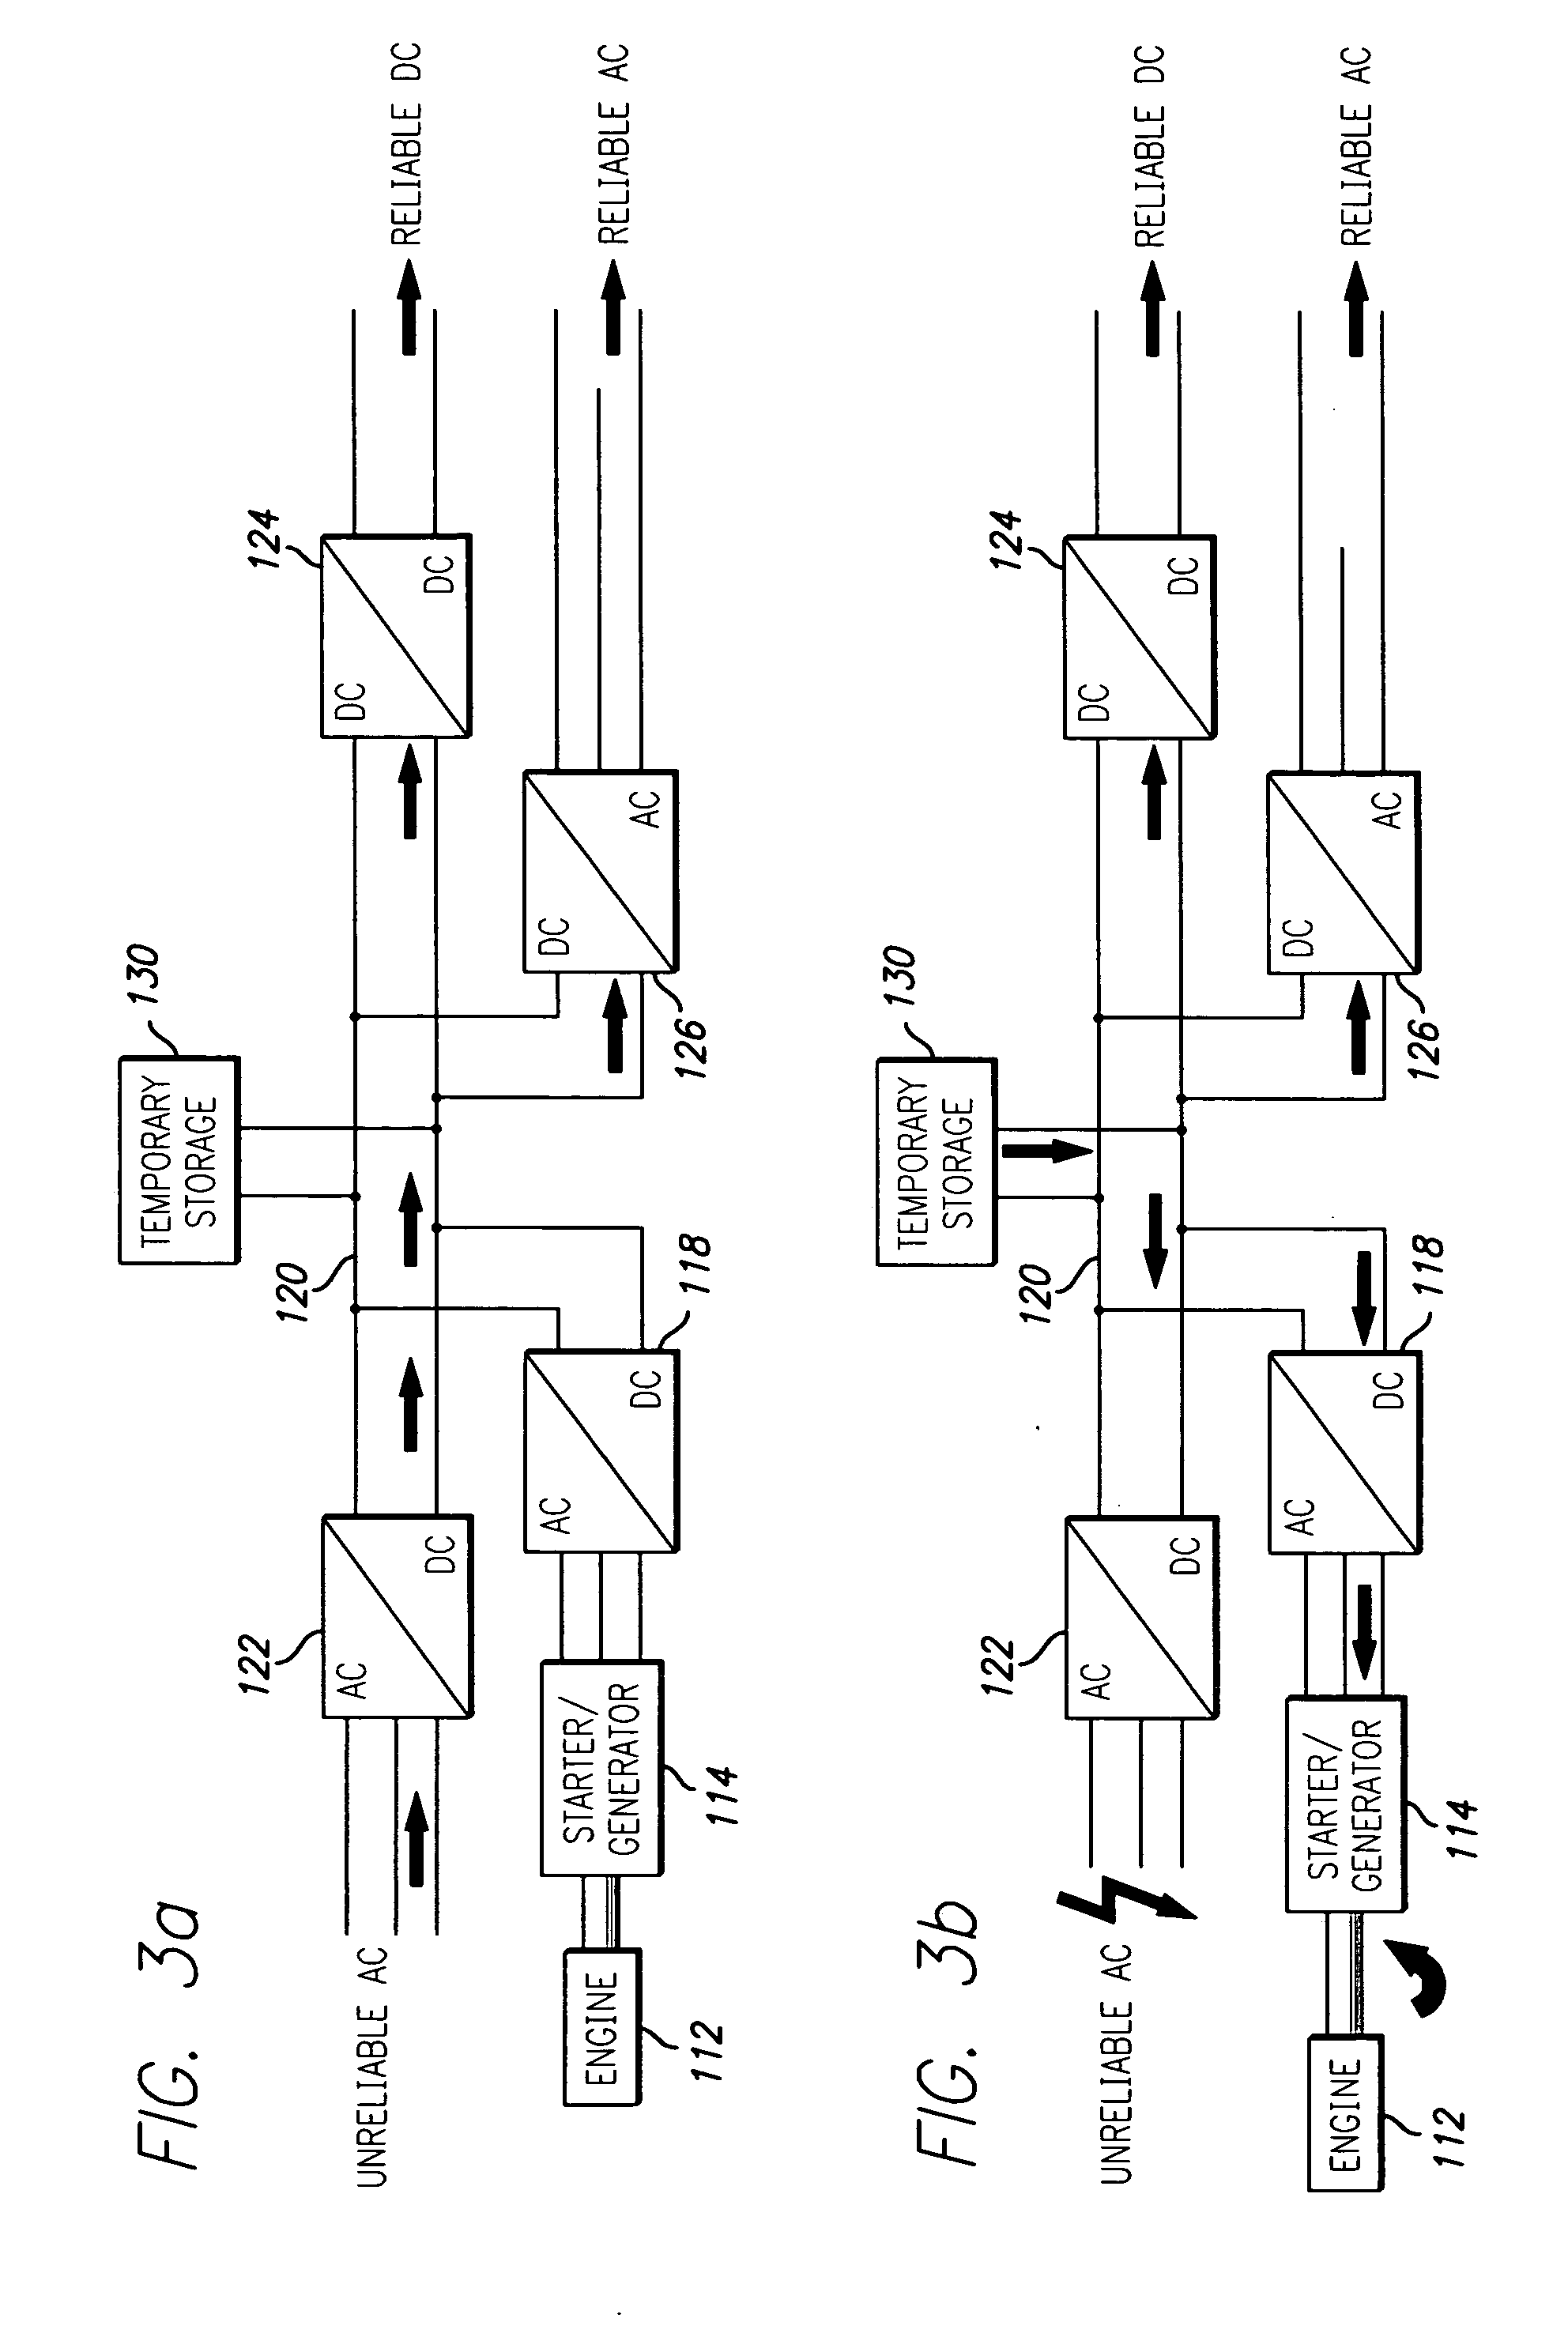 Control system for distributed power generation, conversion, and storage system